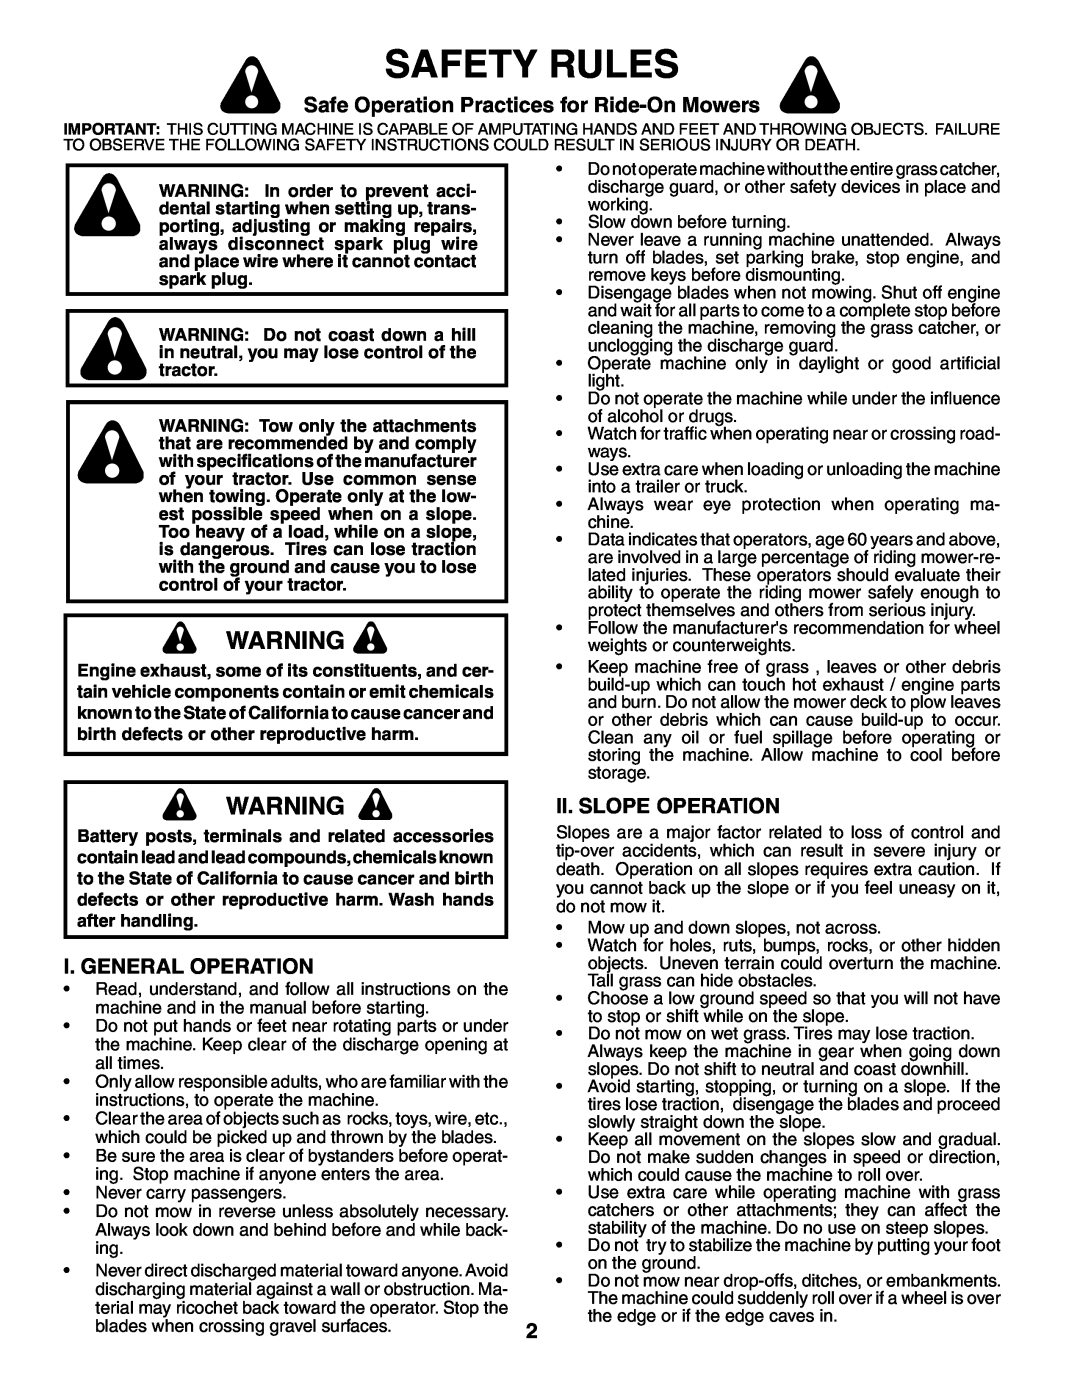 Weed Eater HD13538 Safety Rules, Safe Operation Practices for Ride-OnMowers, I. General Operation, Ii. Slope Operation 